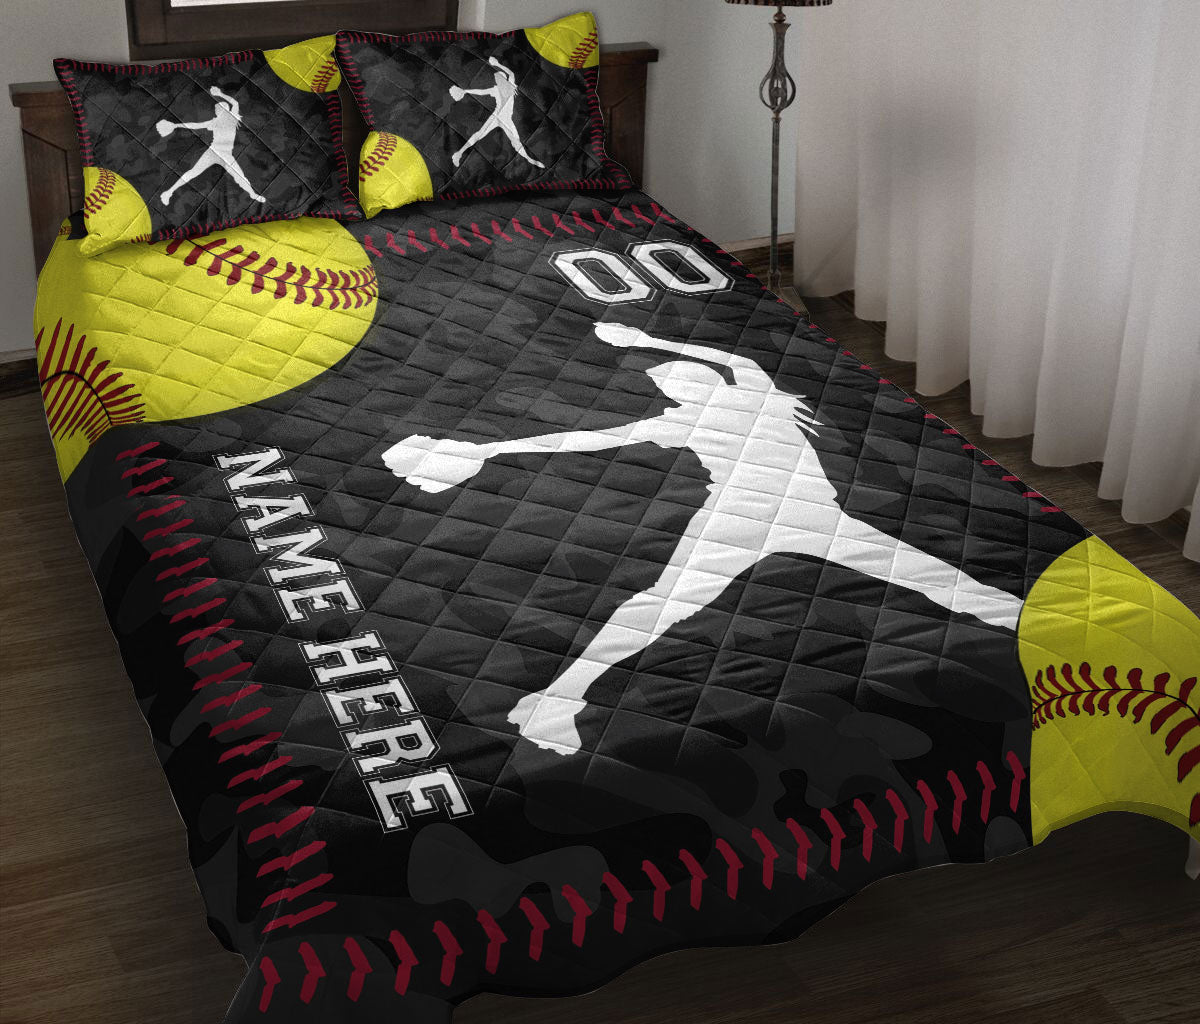 Ohaprints-Quilt-Bed-Set-Pillowcase-Softball-Pitcher-Yellow-Ball-Sport-Lover-Gift-Custom-Personalized-Name-Number-Blanket-Bedspread-Bedding-2914-Throw (55'' x 60'')